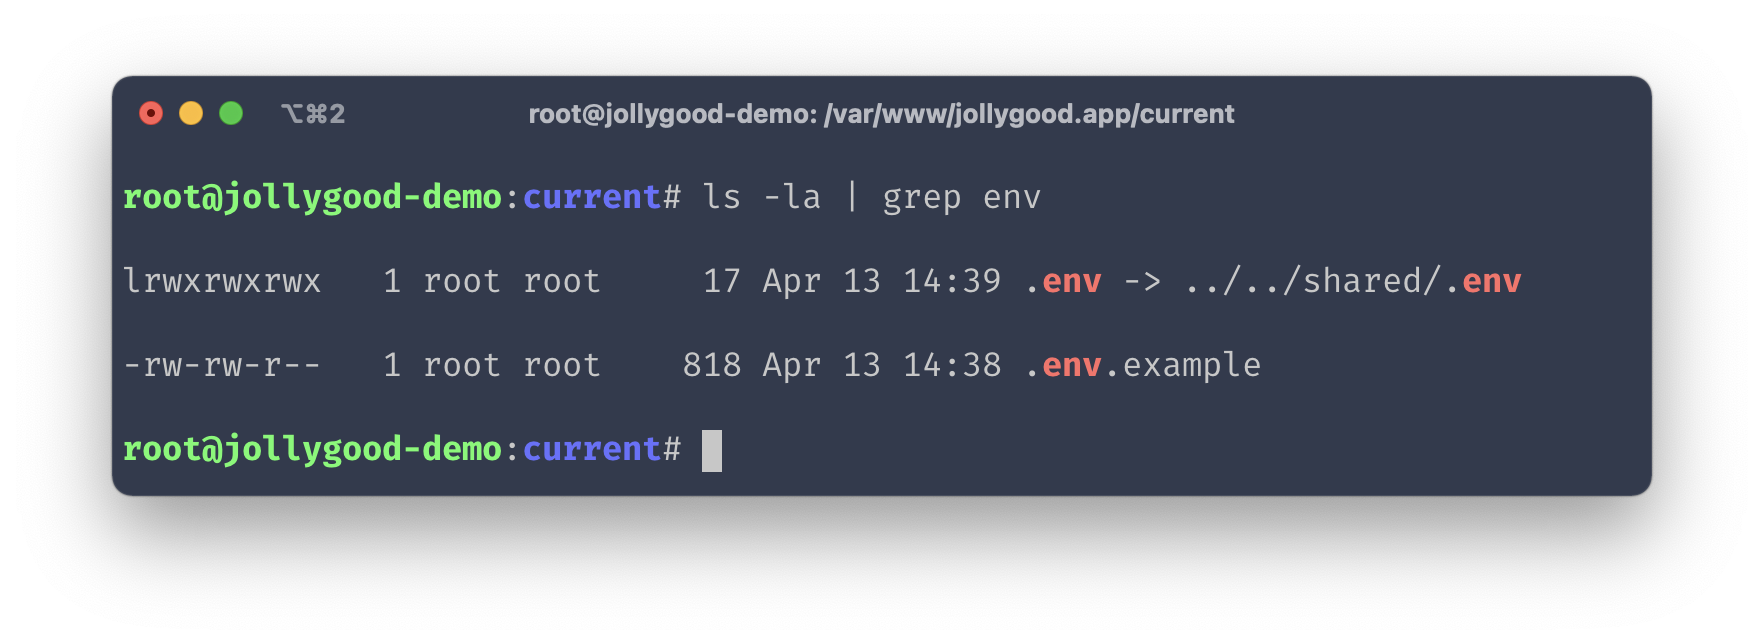 Terminal output of the &quot;ls -la | grep env&quot; command on the server. It shows that the &quot;.env&quot; file is a symlink to &quot;../../shared/.env&quot;.